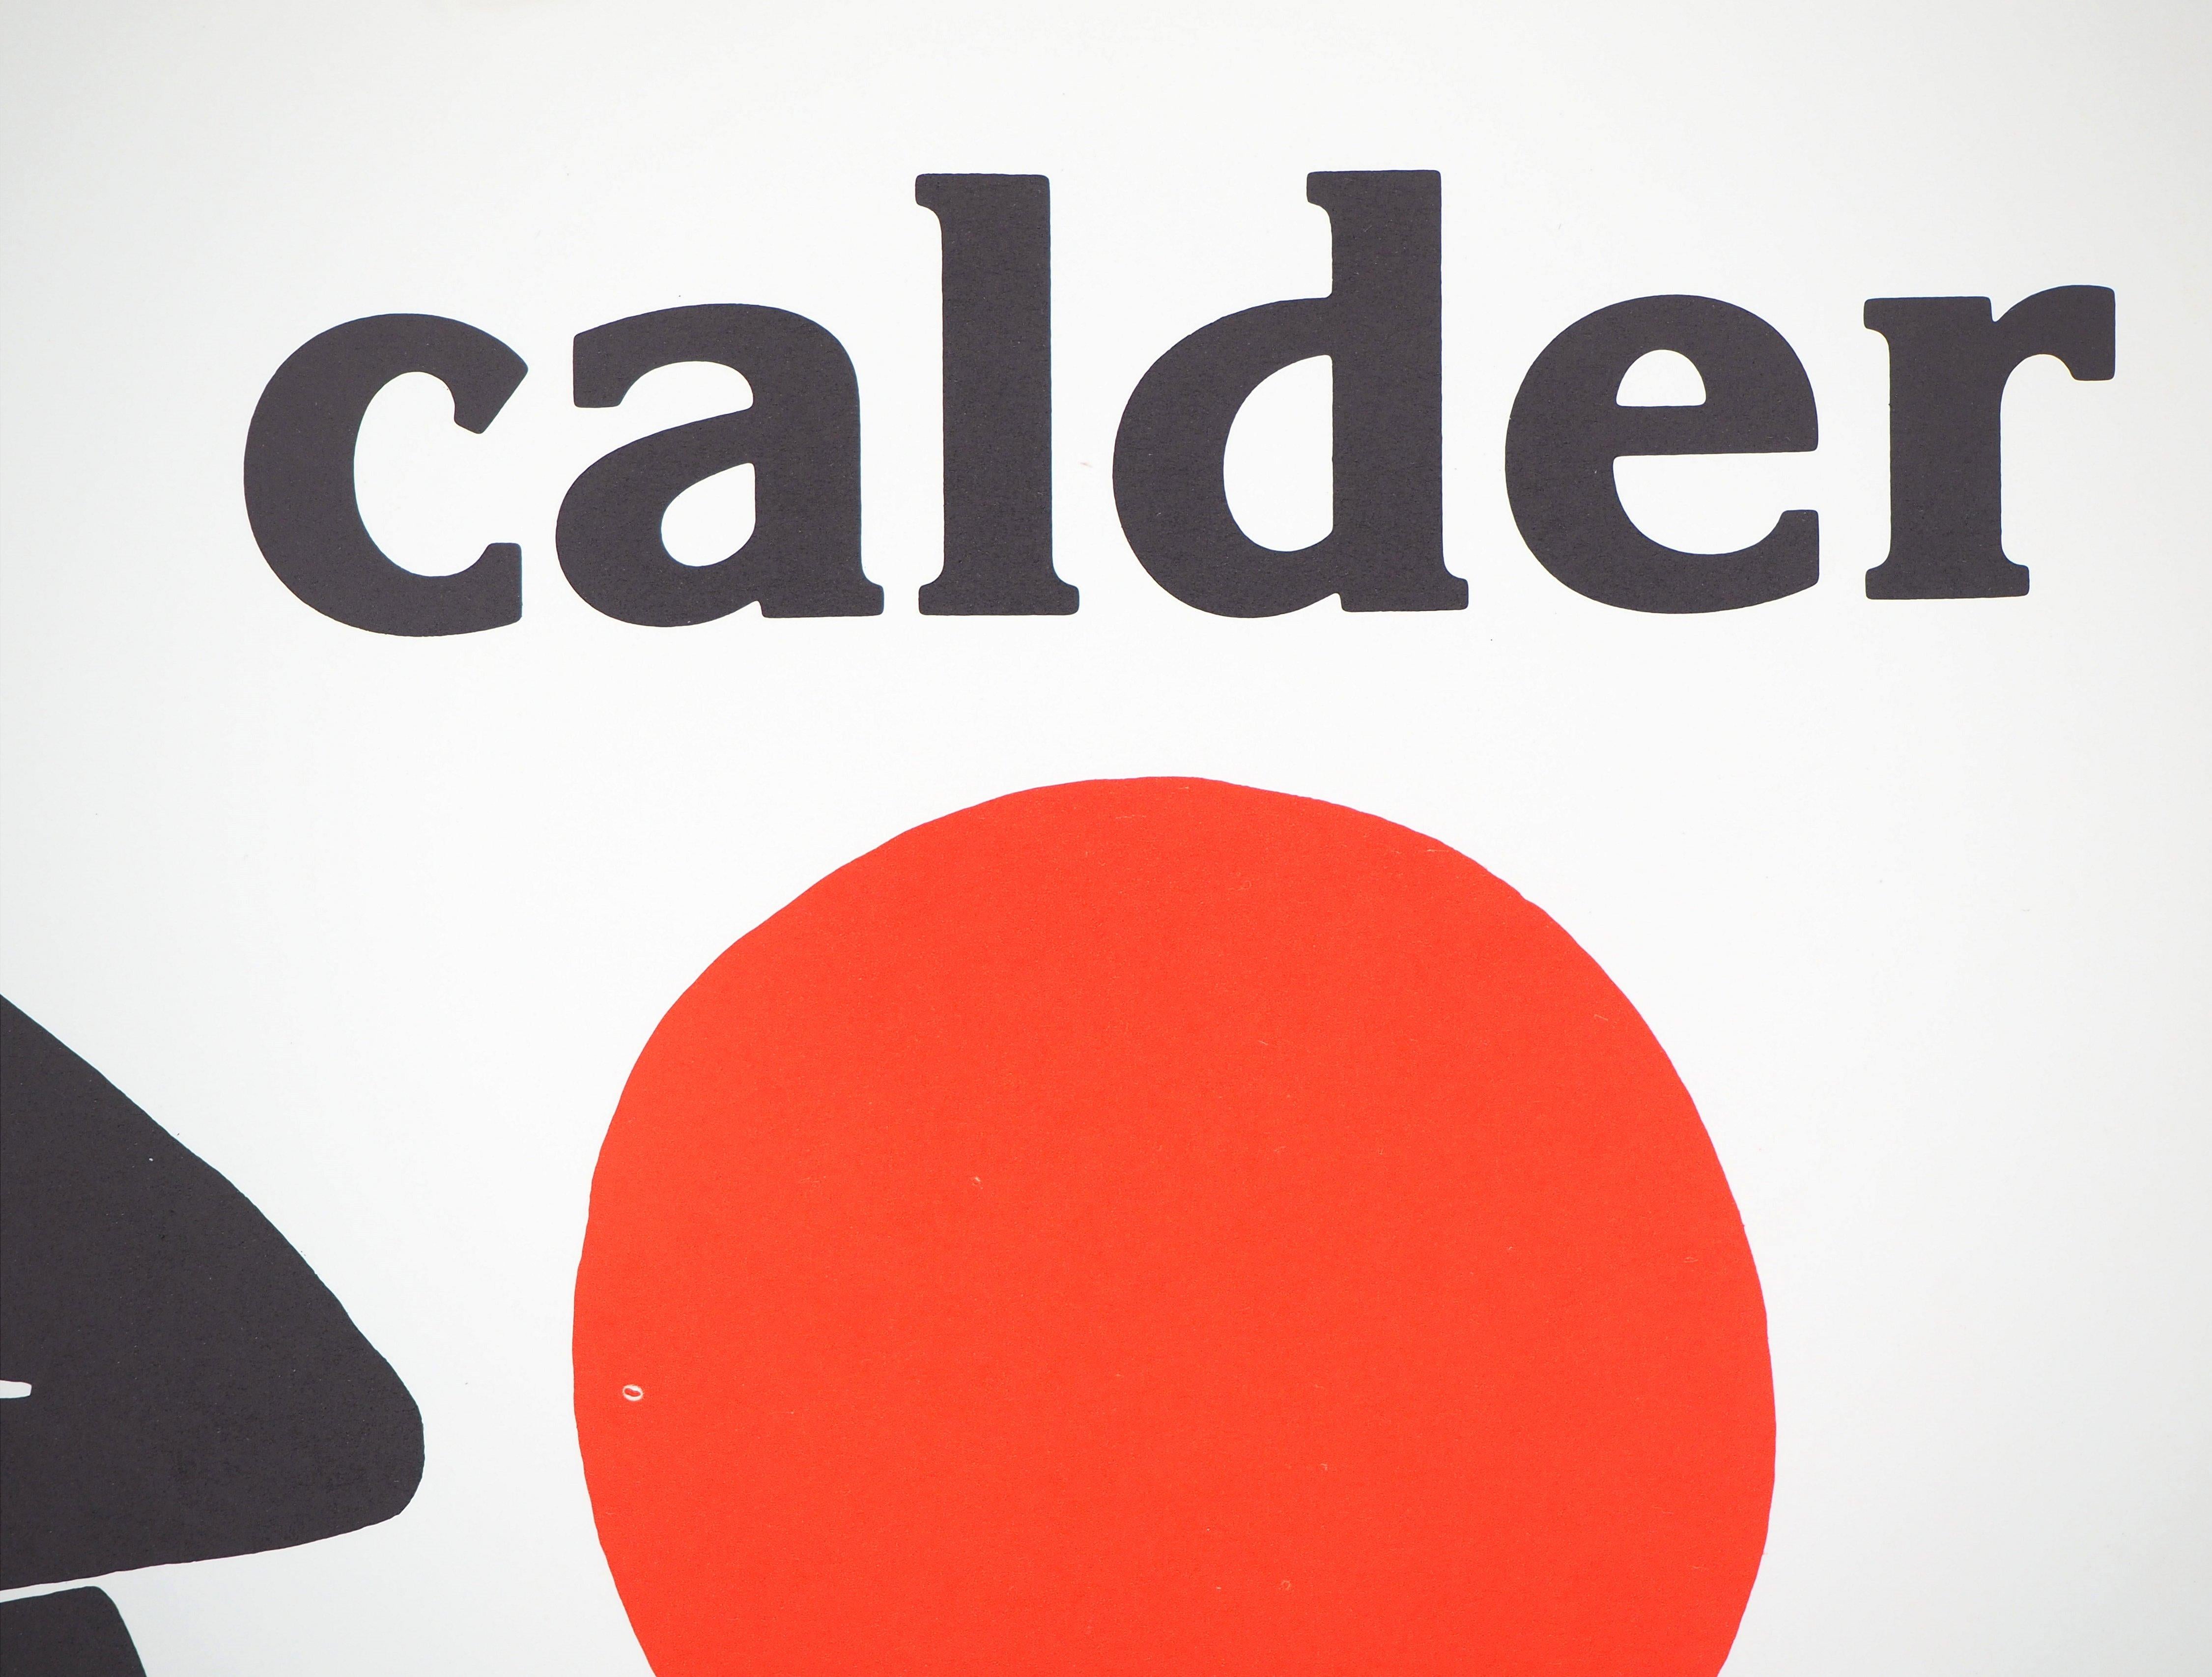 Black Tree with Red Sun - Lithograph poster - Maeght, 1976-77 - Print by (after) Alexander Calder